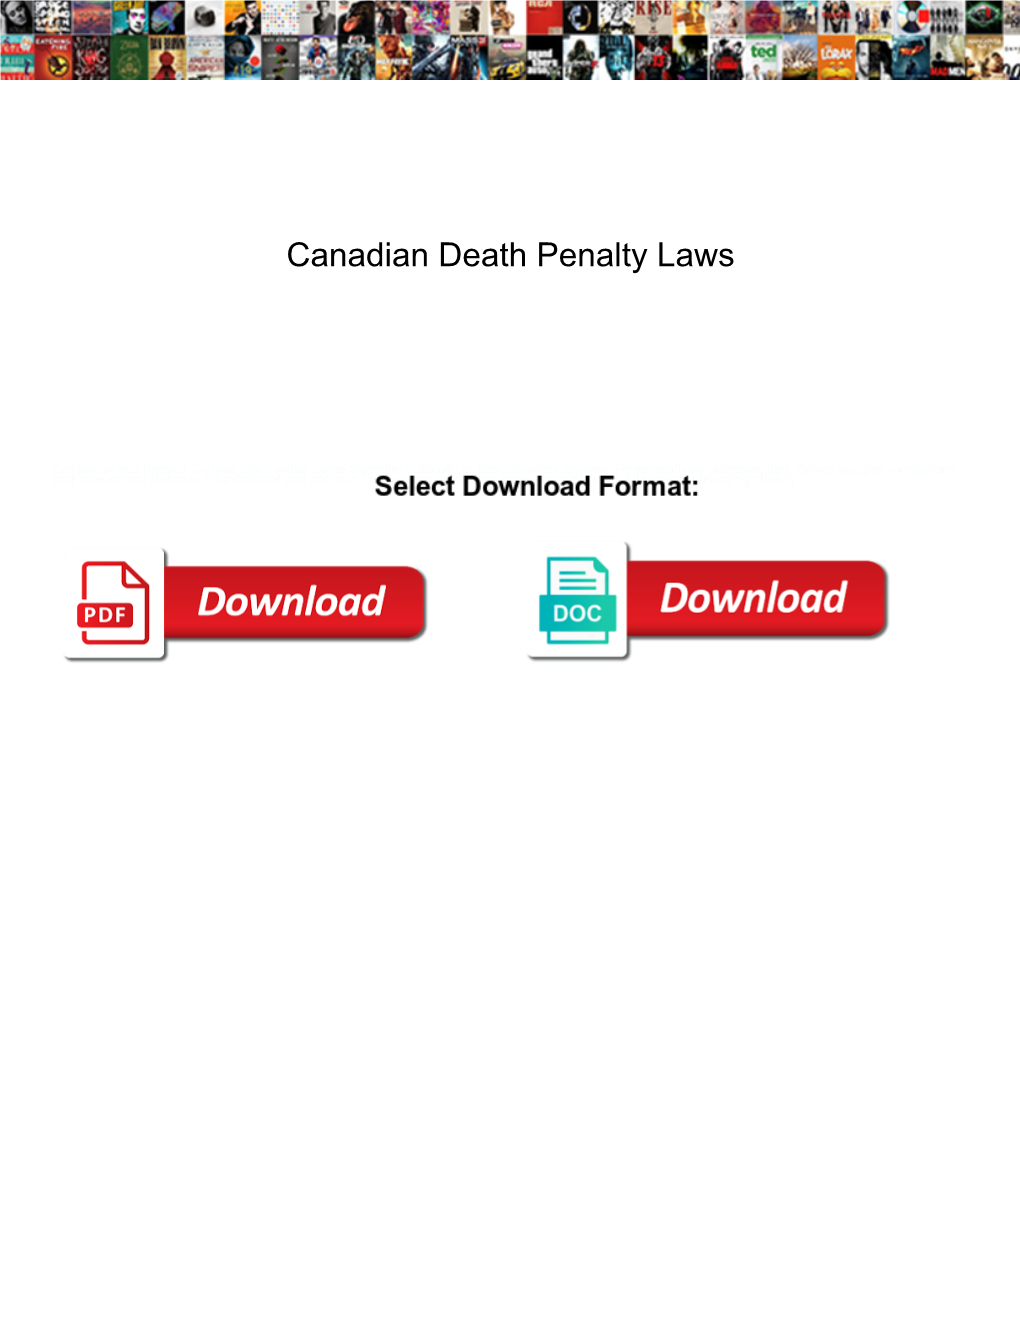 Canadian Death Penalty Laws